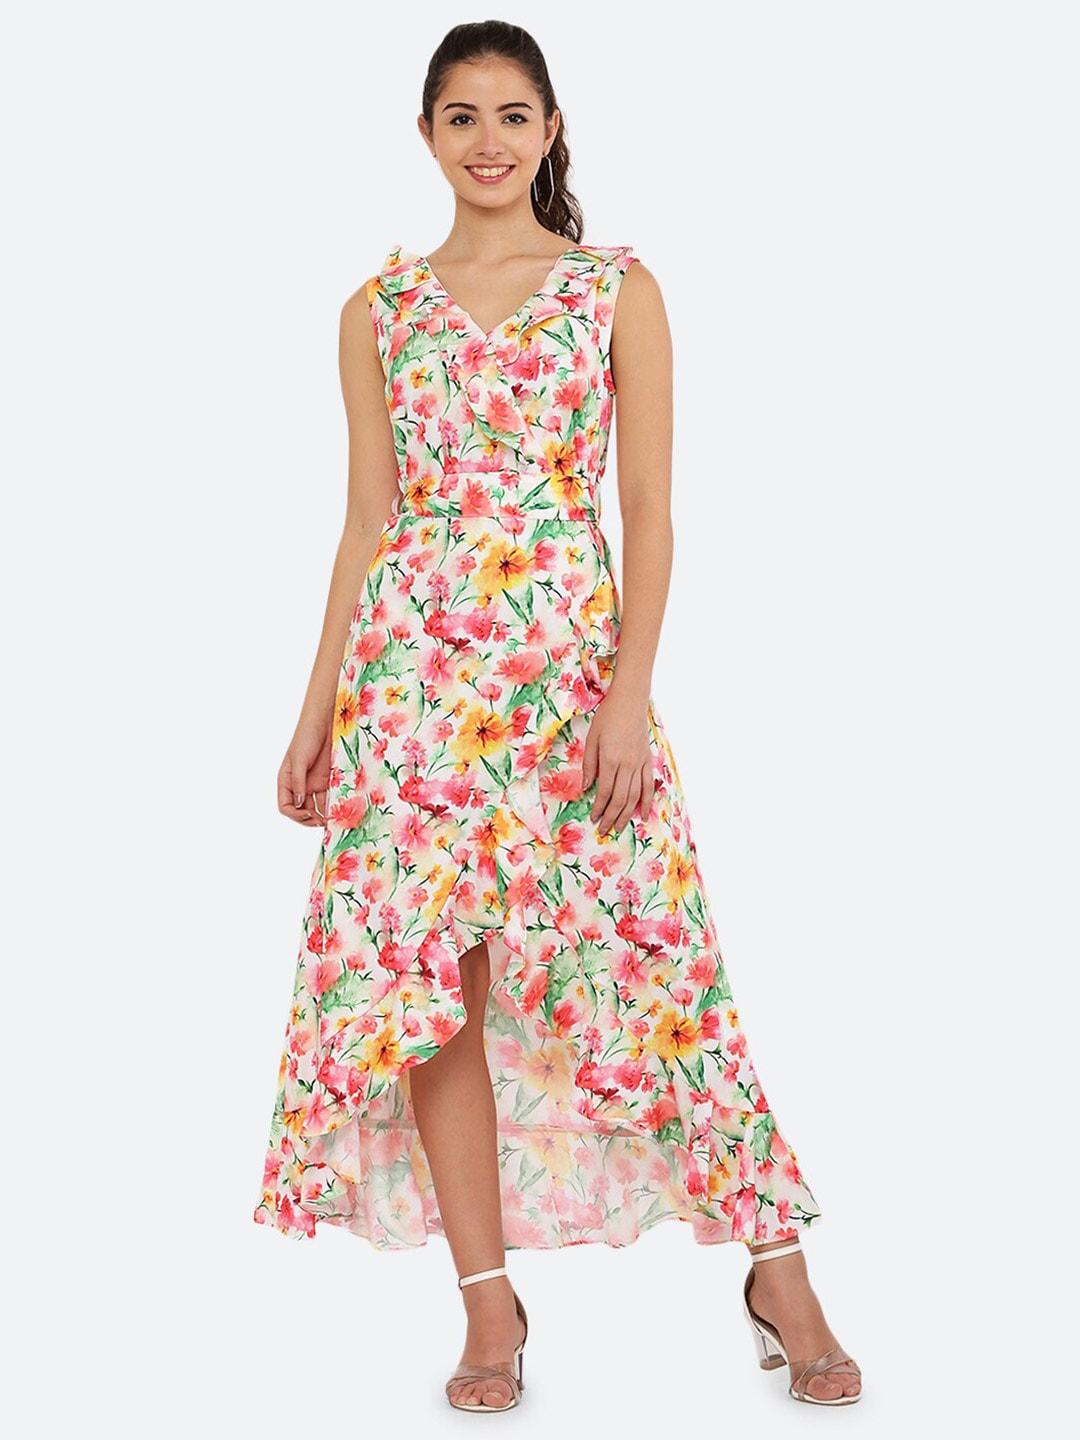 raassio off white & pink floral crepe maxi dress